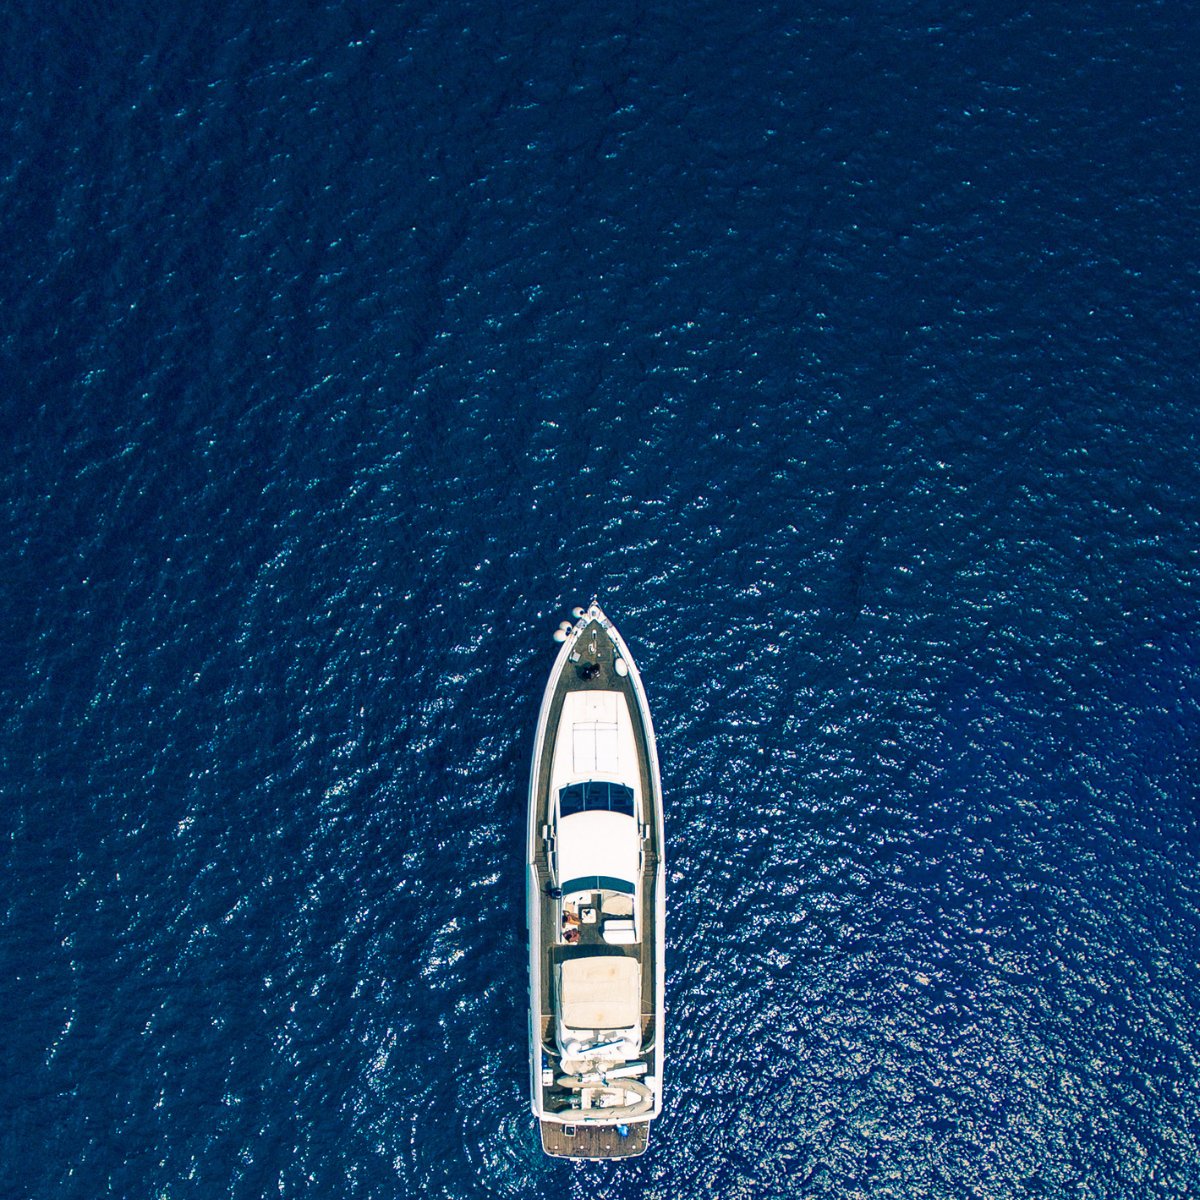 We have collected decades of experience in the yacht service industry. 

For more information, get in contact today at +356 2090 4000 or email info@yachtyard-malta.com

bit.ly/3vwJPQc

#ManoelIslandYachtYard #Superyachtrefit #Yachtmaintenance #yachtrepairs